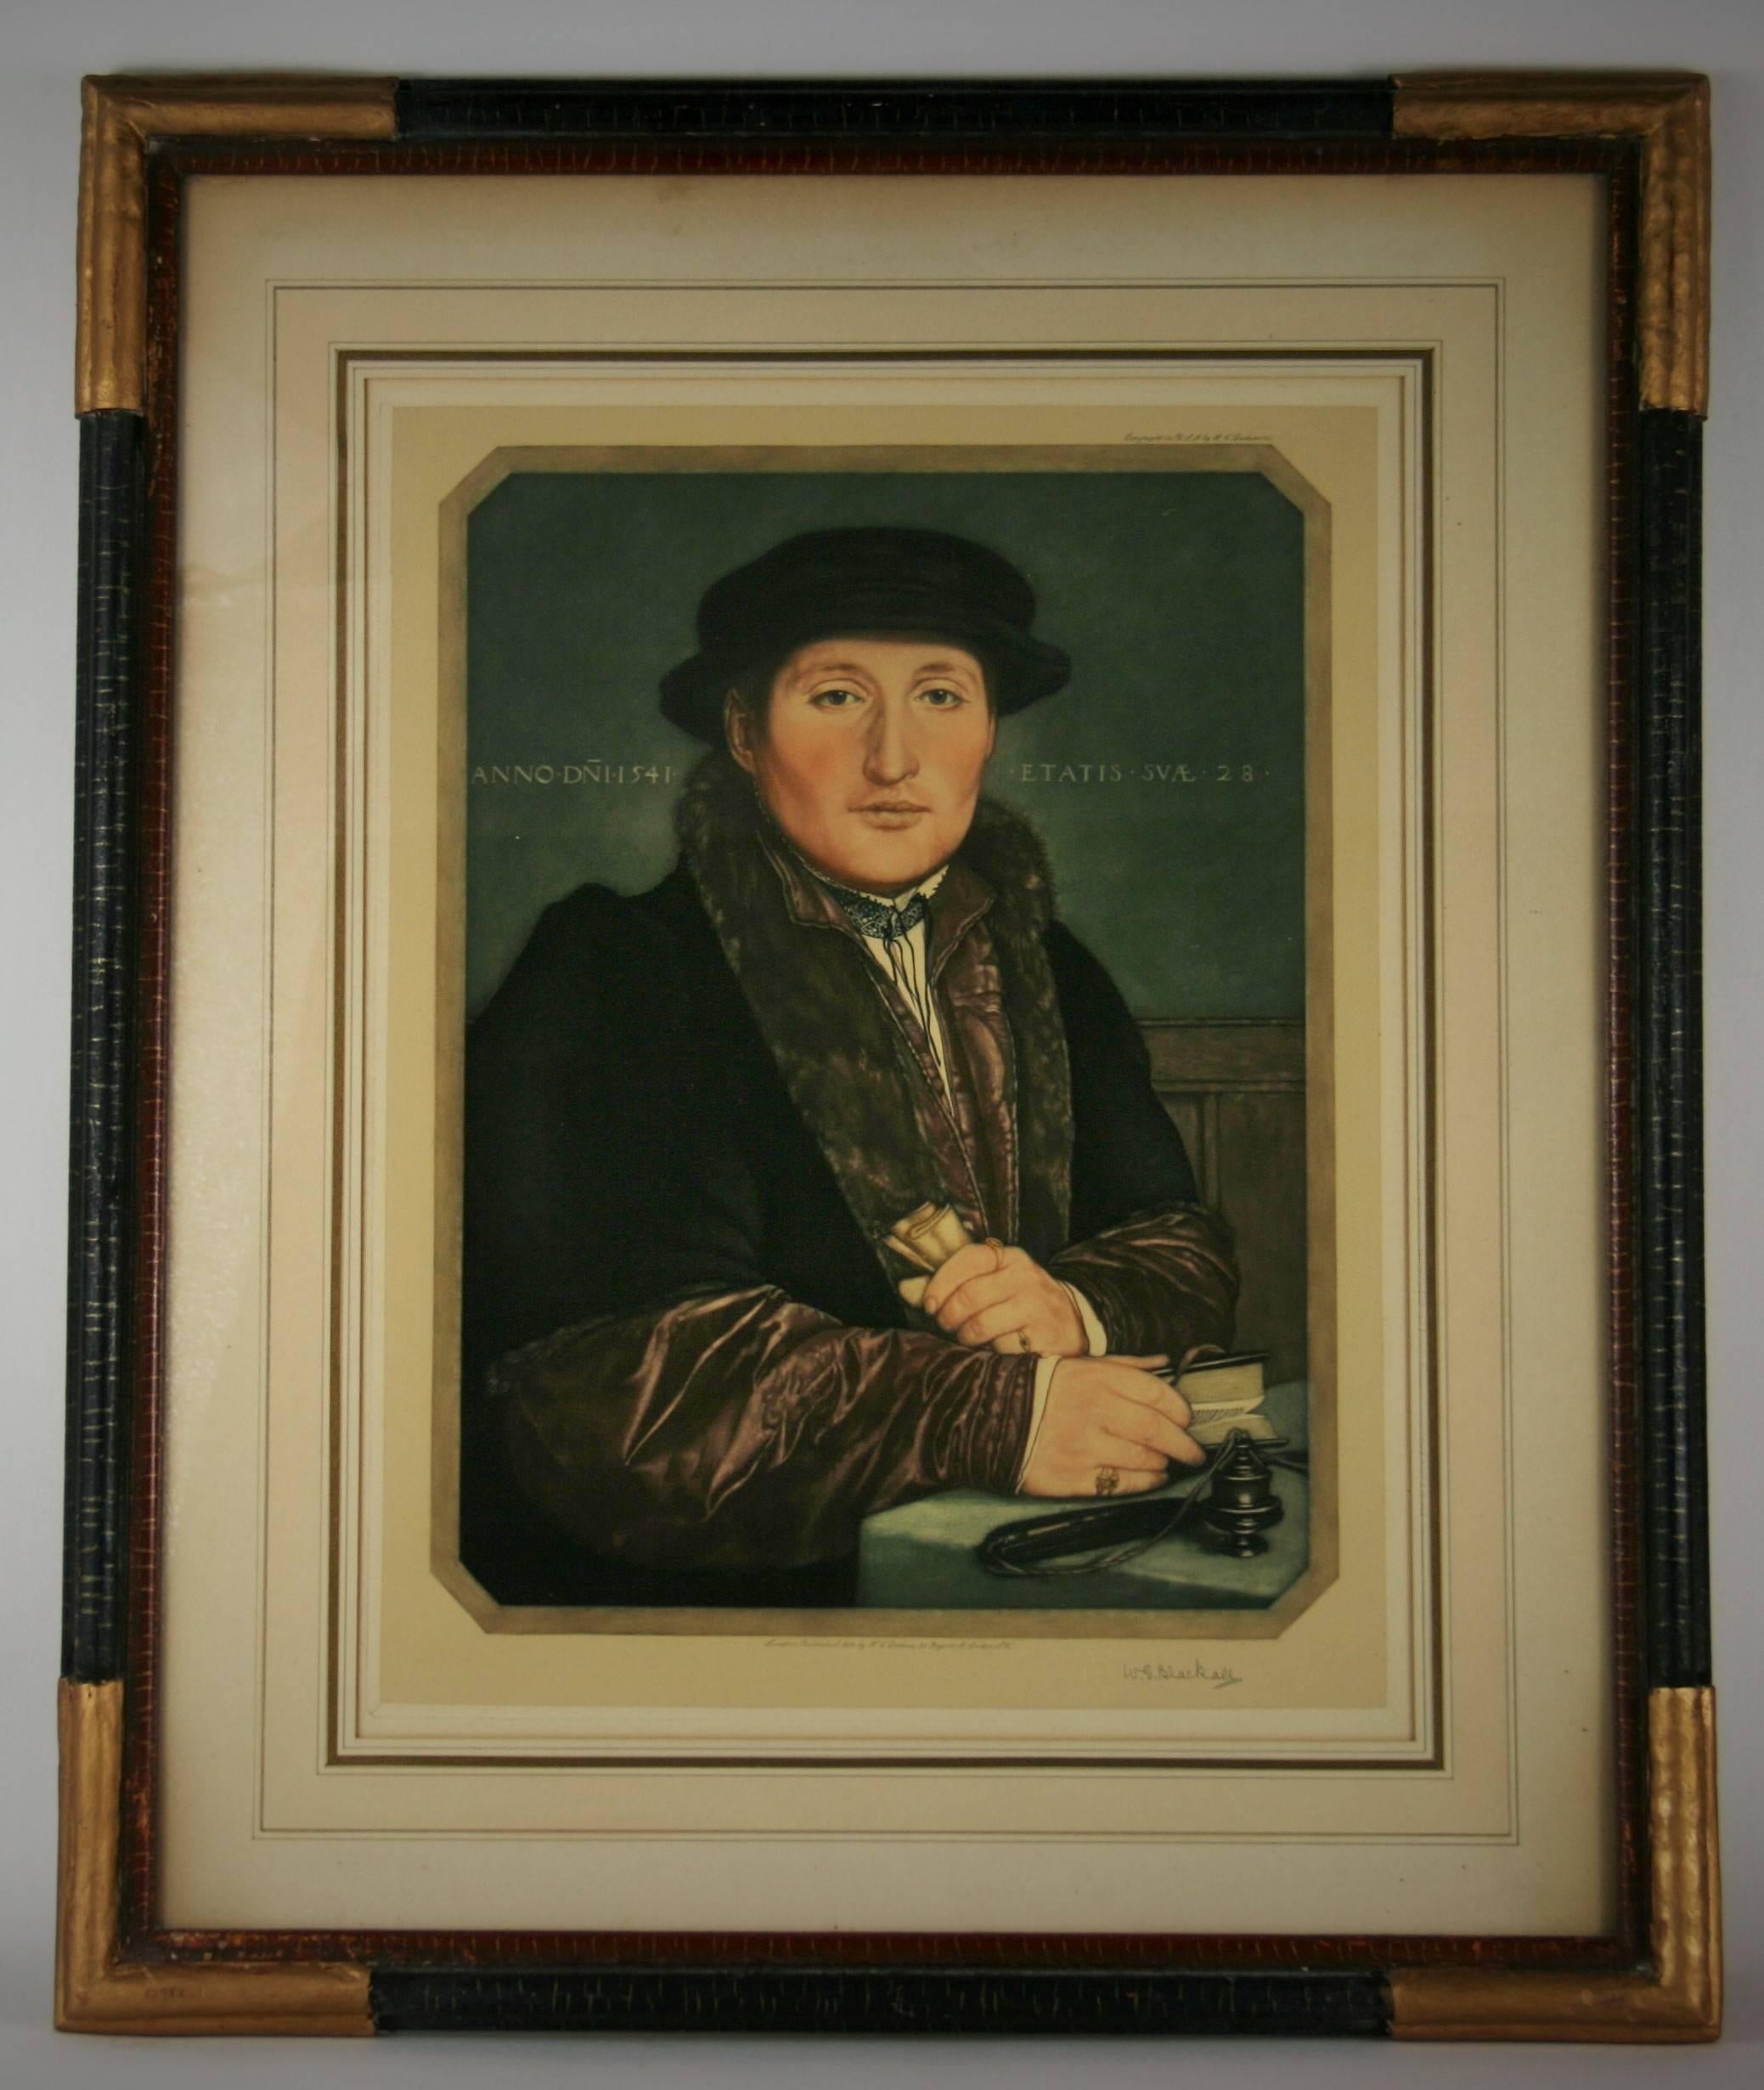 5-2559 19th century engraving of a European nobleman set in a custom wood frame.
Signed W.J.Blackall.